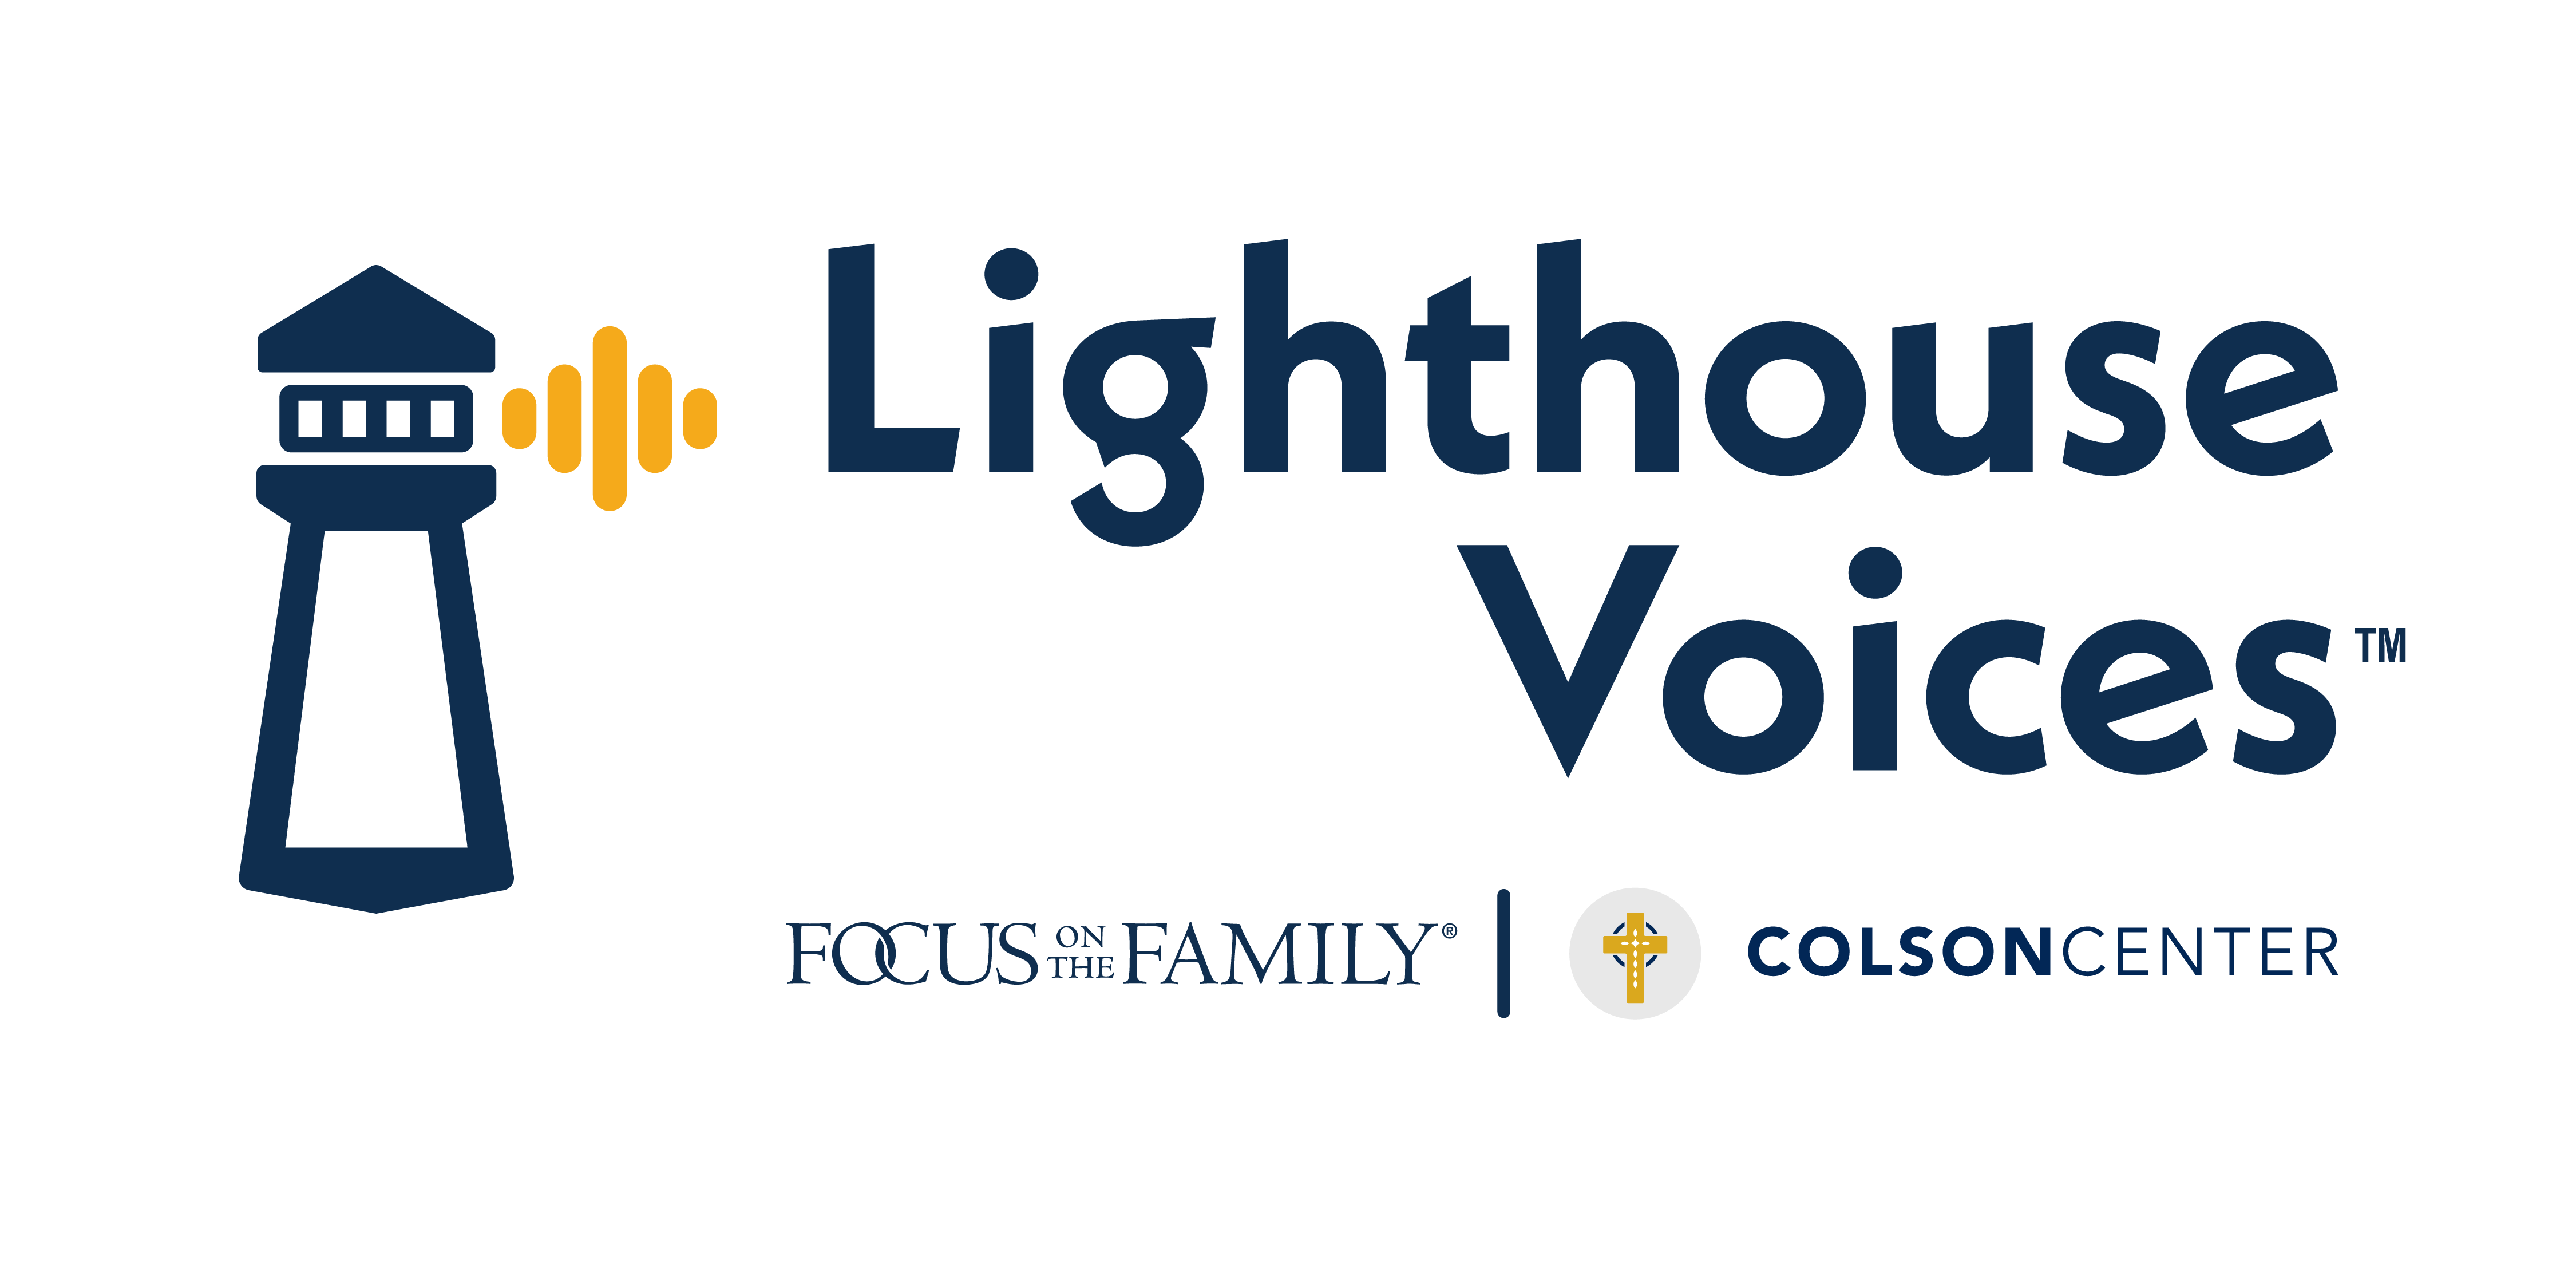 Lighthouse Voices, by Focus on the Family and the Colson Center